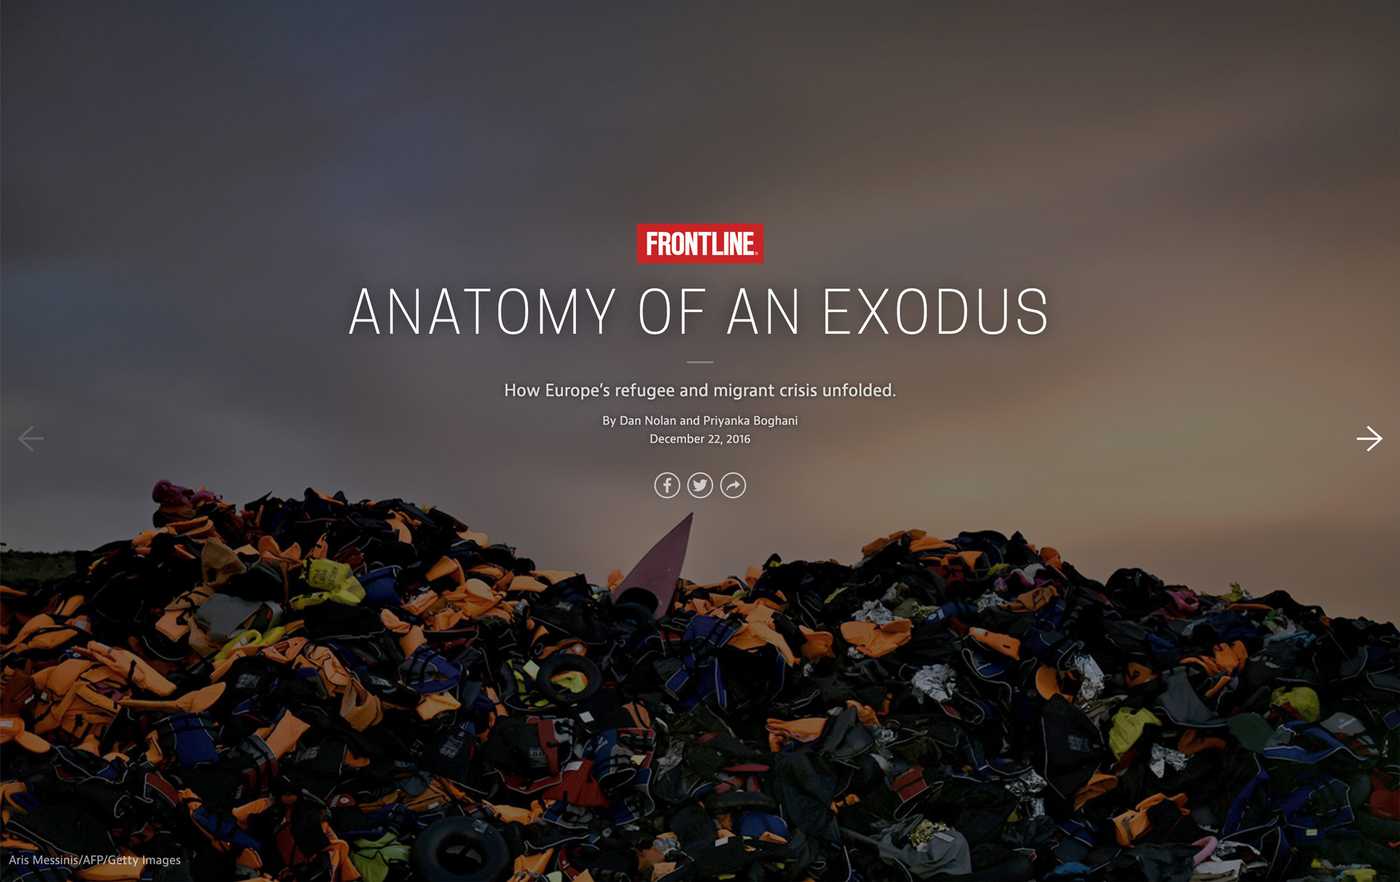 Life vests are piled up into a mountain at the bottom of the screen, the title text reads, “Anatomy of an Exodus.”